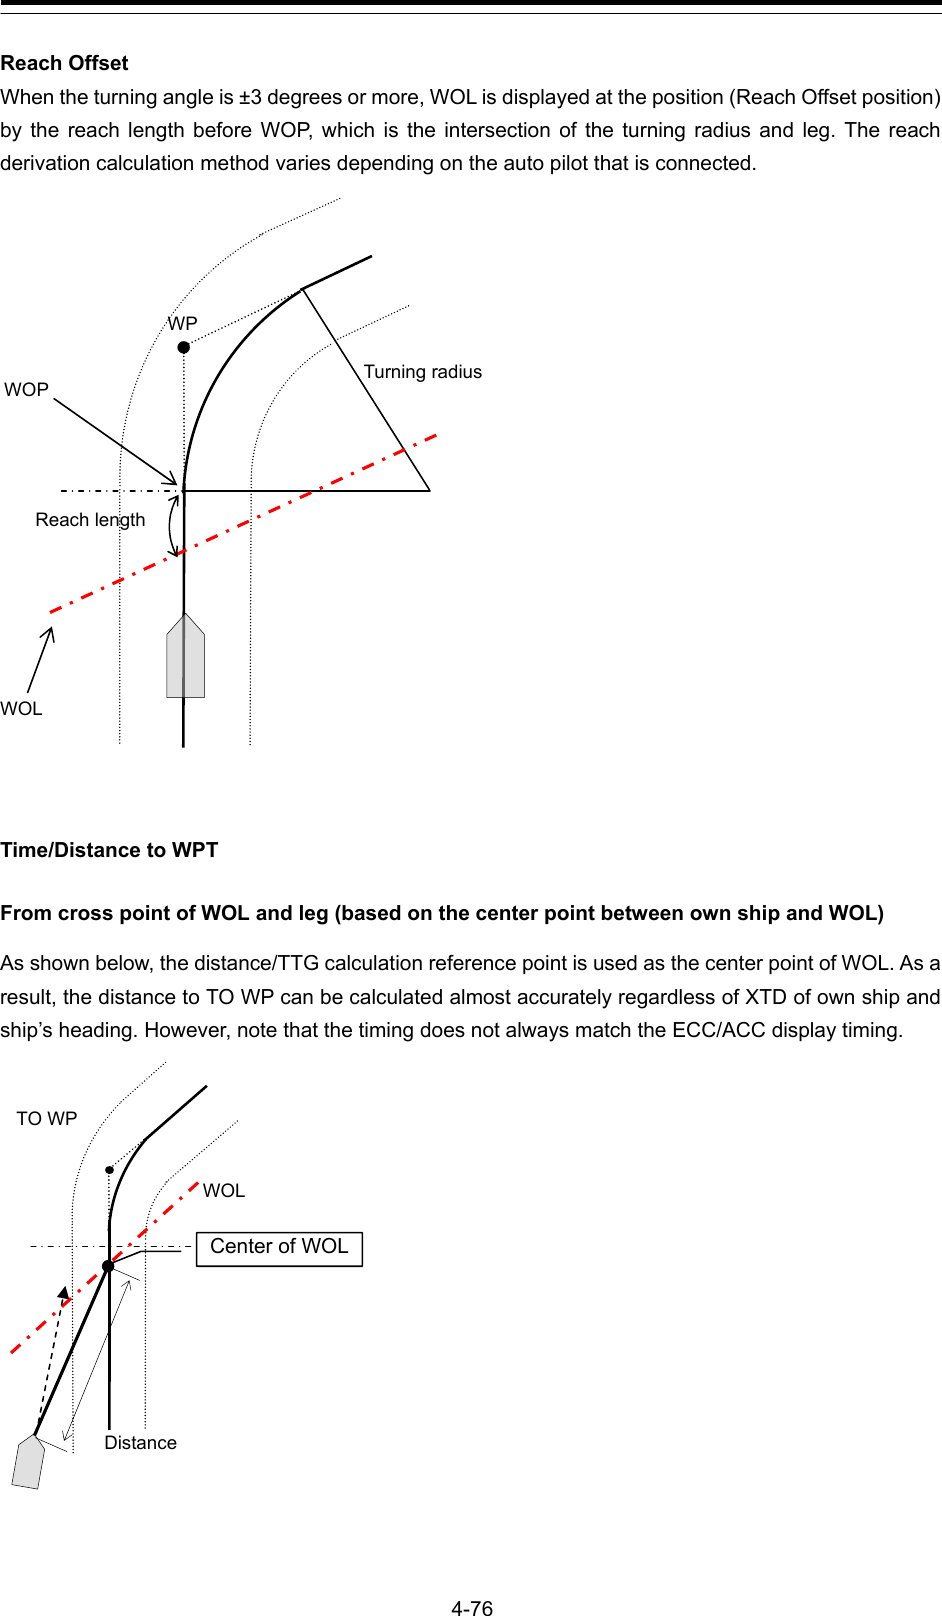  4-76 Reach Offset When the turning angle is ±3 degrees or more, WOL is displayed at the position (Reach Offset position) by the reach length before WOP, which is the intersection of the turning radius and leg. The reach derivation calculation method varies depending on the auto pilot that is connected.                    Time/Distance to WPT  From cross point of WOL and leg (based on the center point between own ship and WOL) As shown below, the distance/TTG calculation reference point is used as the center point of WOL. As a result, the distance to TO WP can be calculated almost accurately regardless of XTD of own ship and ship’s heading. However, note that the timing does not always match the ECC/ACC display timing.                WOL TO WP Distance Center of WOL WP Reach length WOL WOP Turning radius